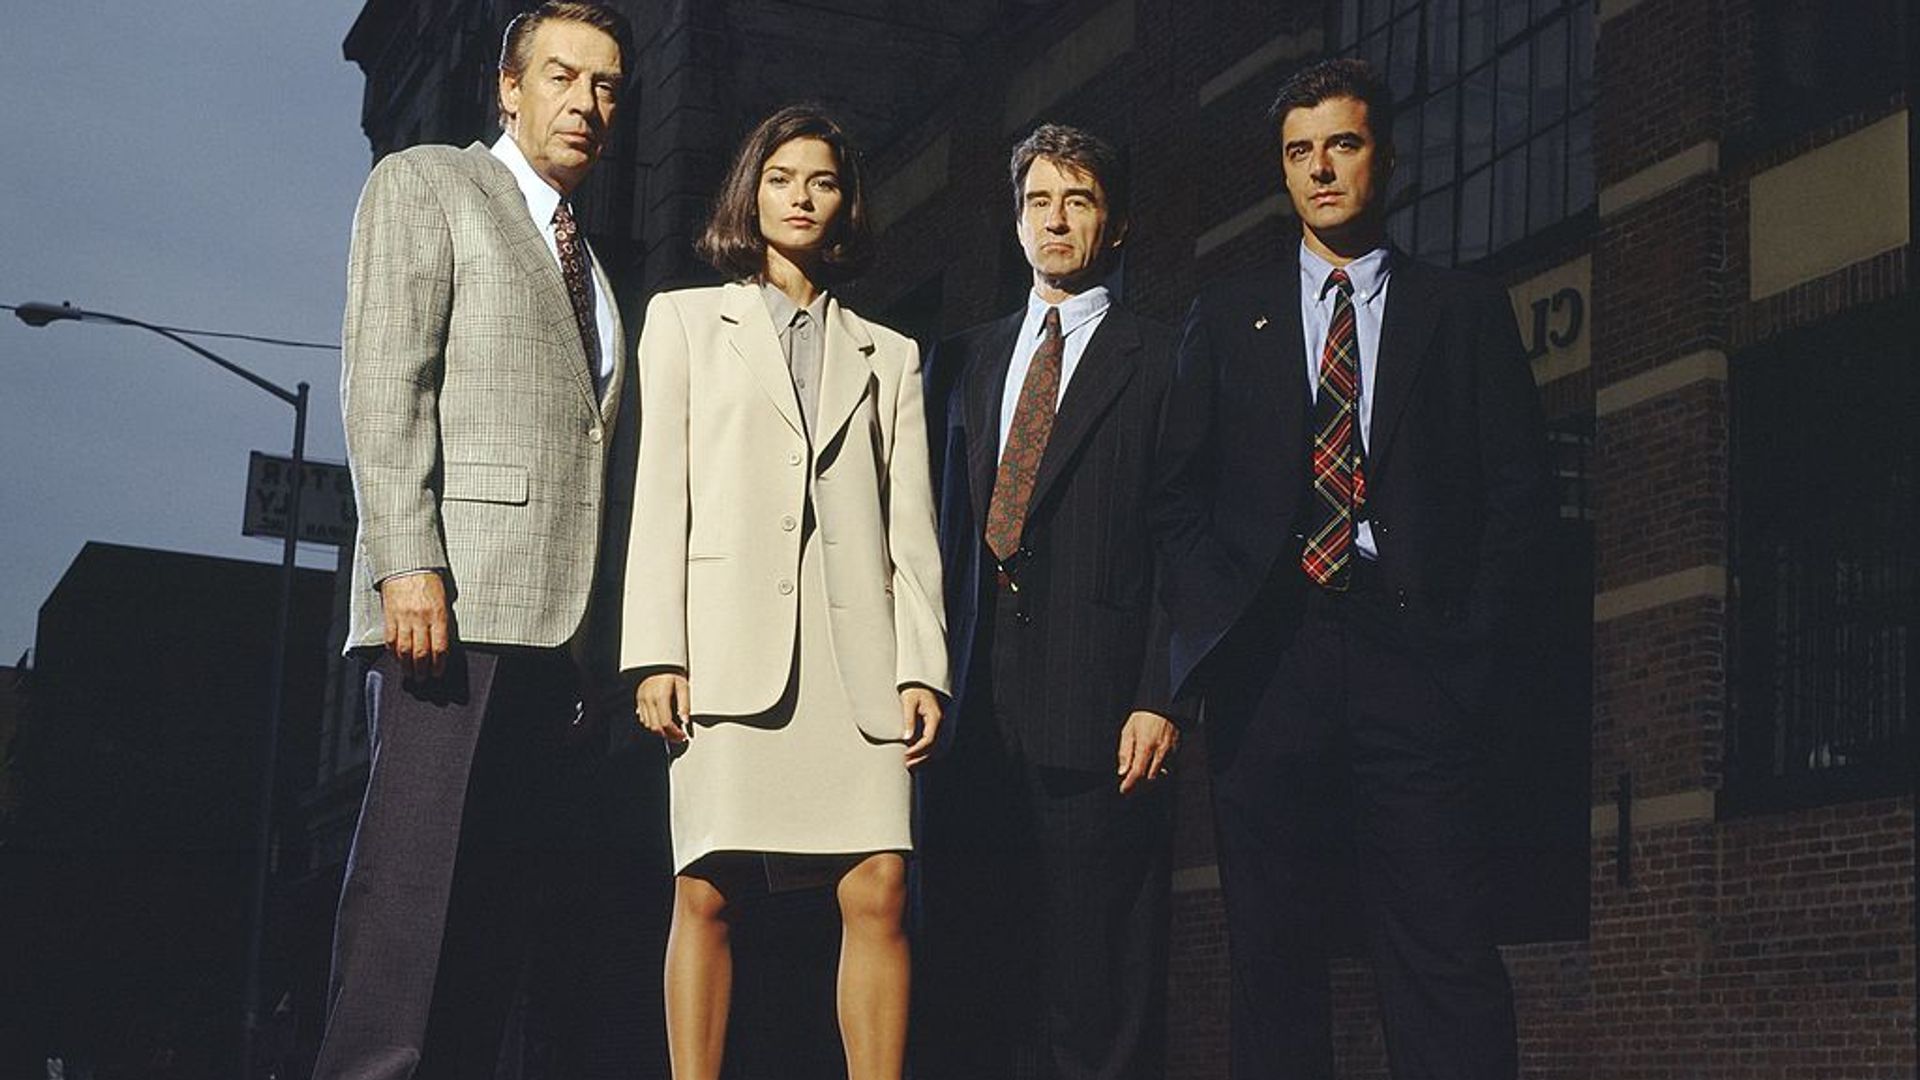 Law & Order cast: the stars that left the show and where they are now